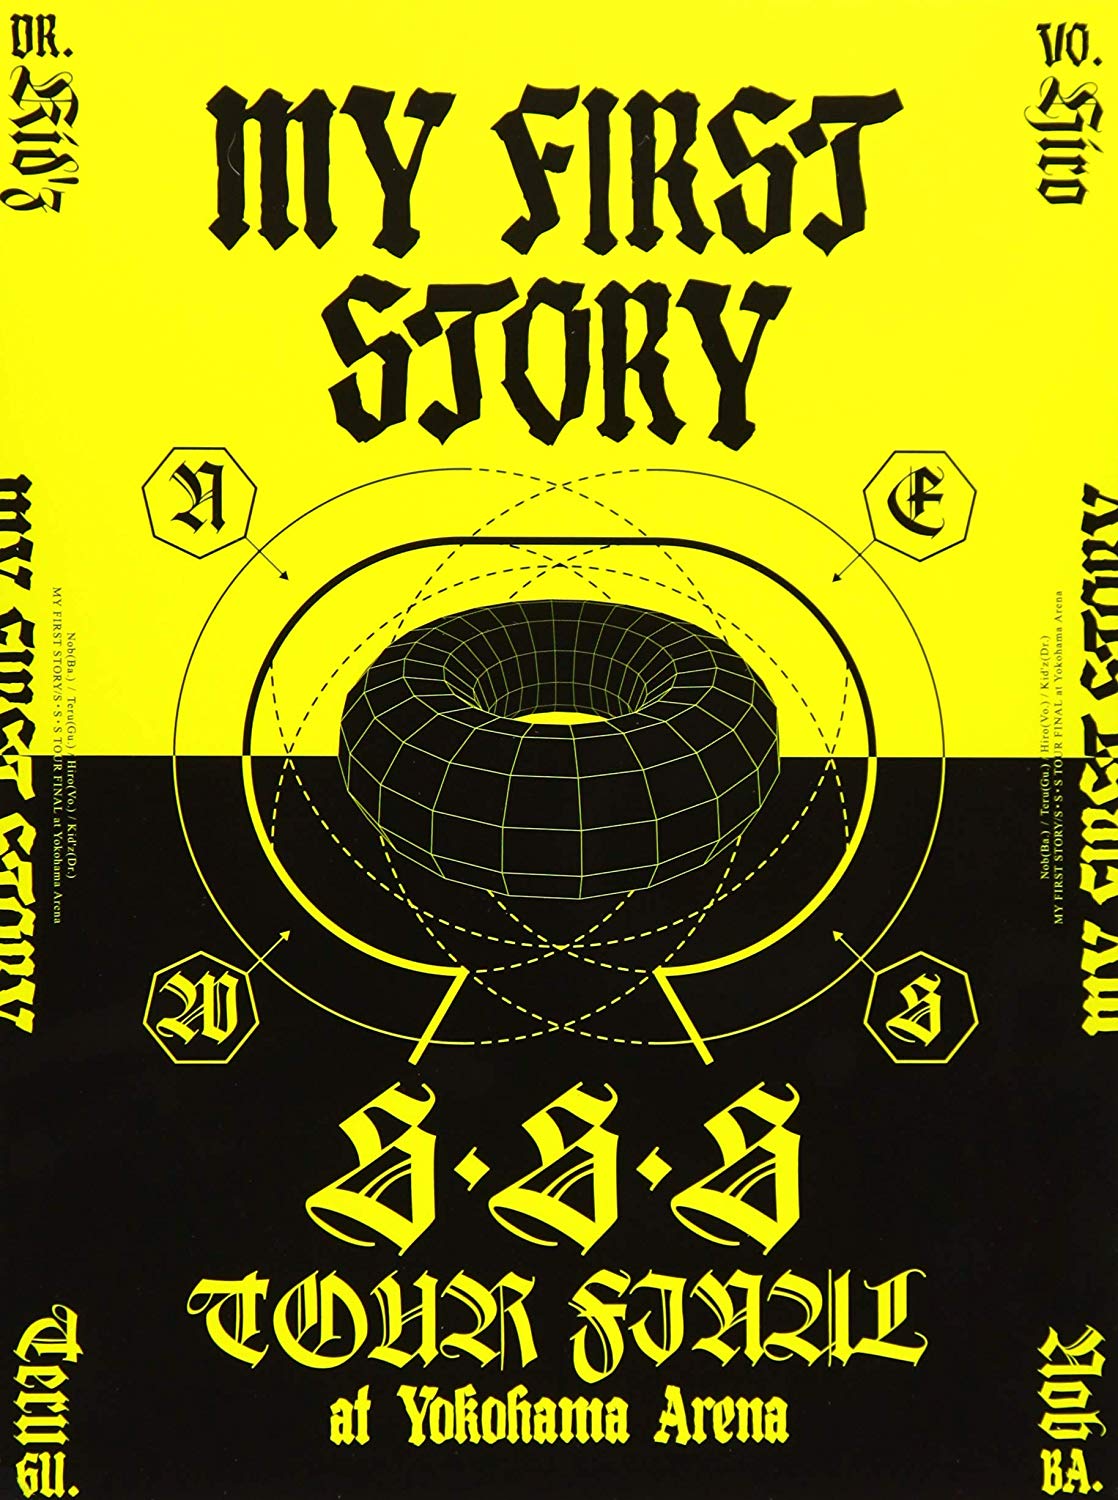 MY FIRST STORY演唱会 MY FIRST STORY「S・S・S TOUR FINAL at Yokohama Arena」